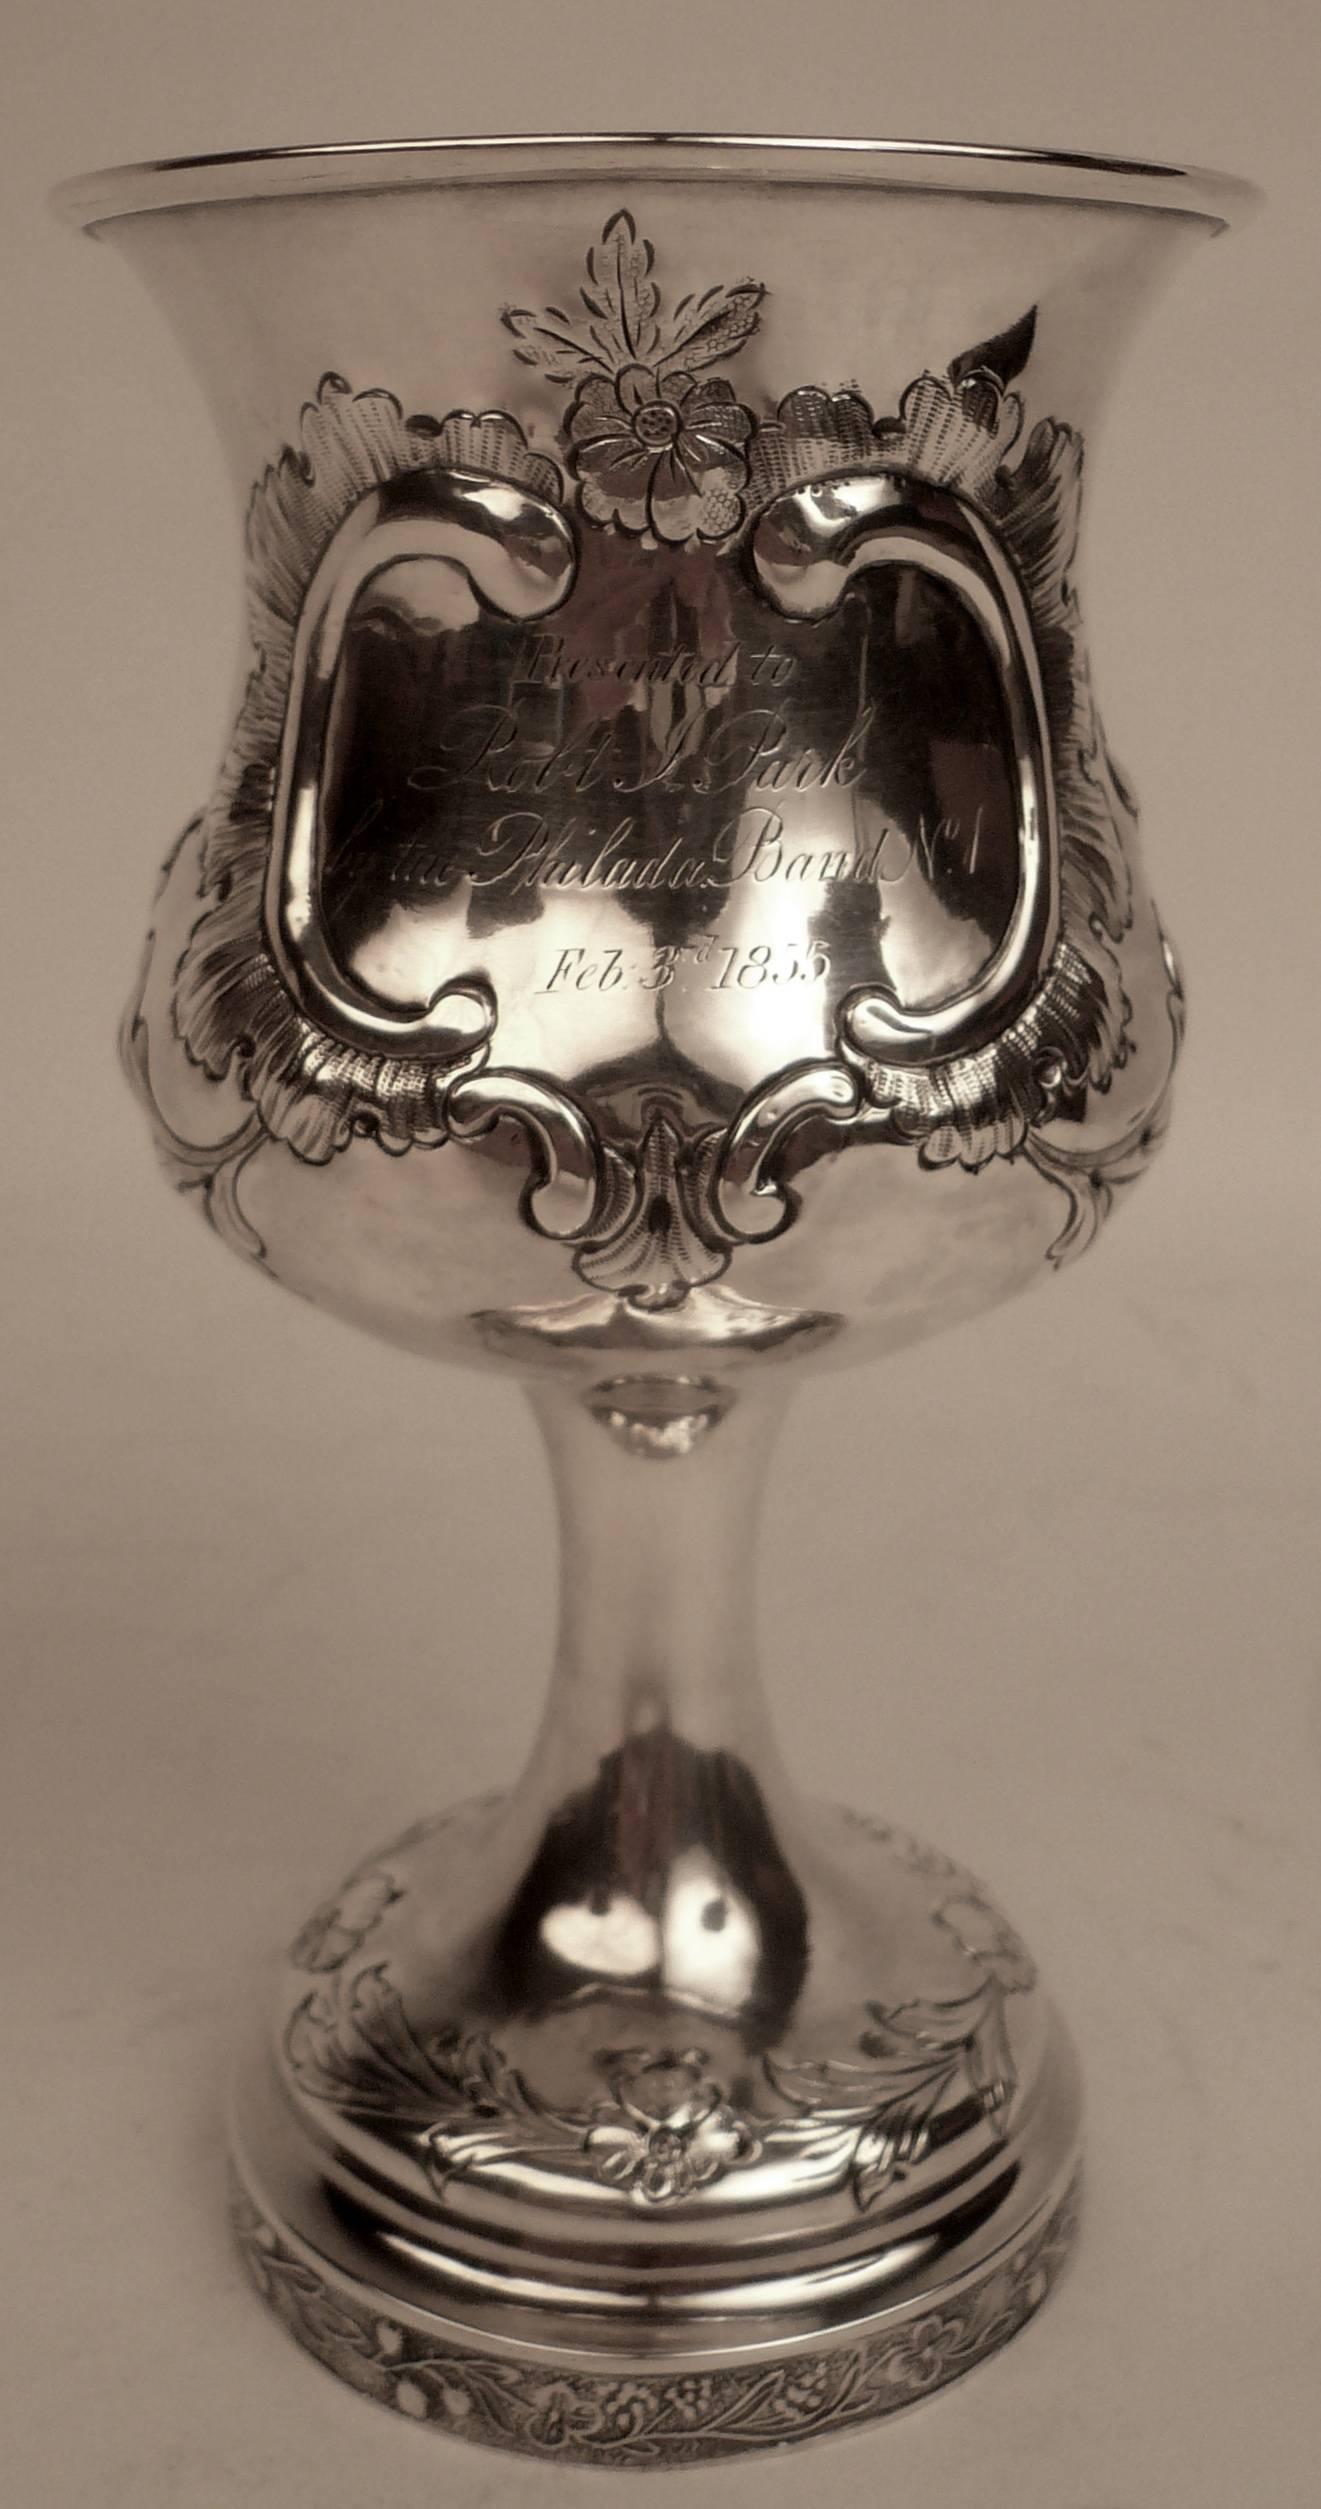 G. K. Childs was a well-known Philadelphia maker who was appointed Chief Coiner to the U S Mint in 1860. This presentation trophy goblet is hand chased and in fine condition.